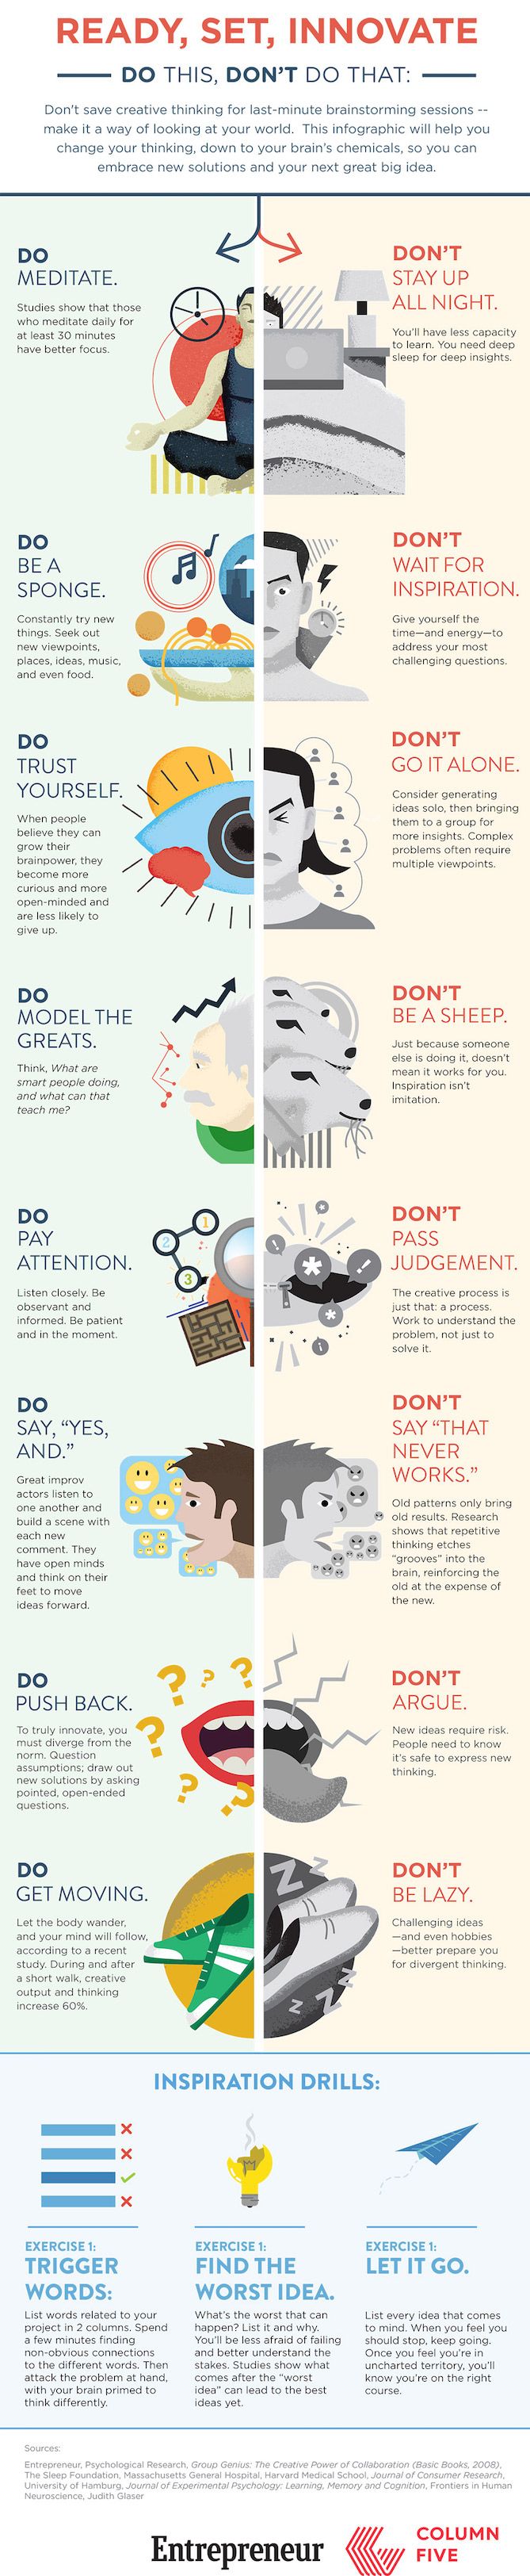 A simple guide to the best and worst ways to stimulate creativity